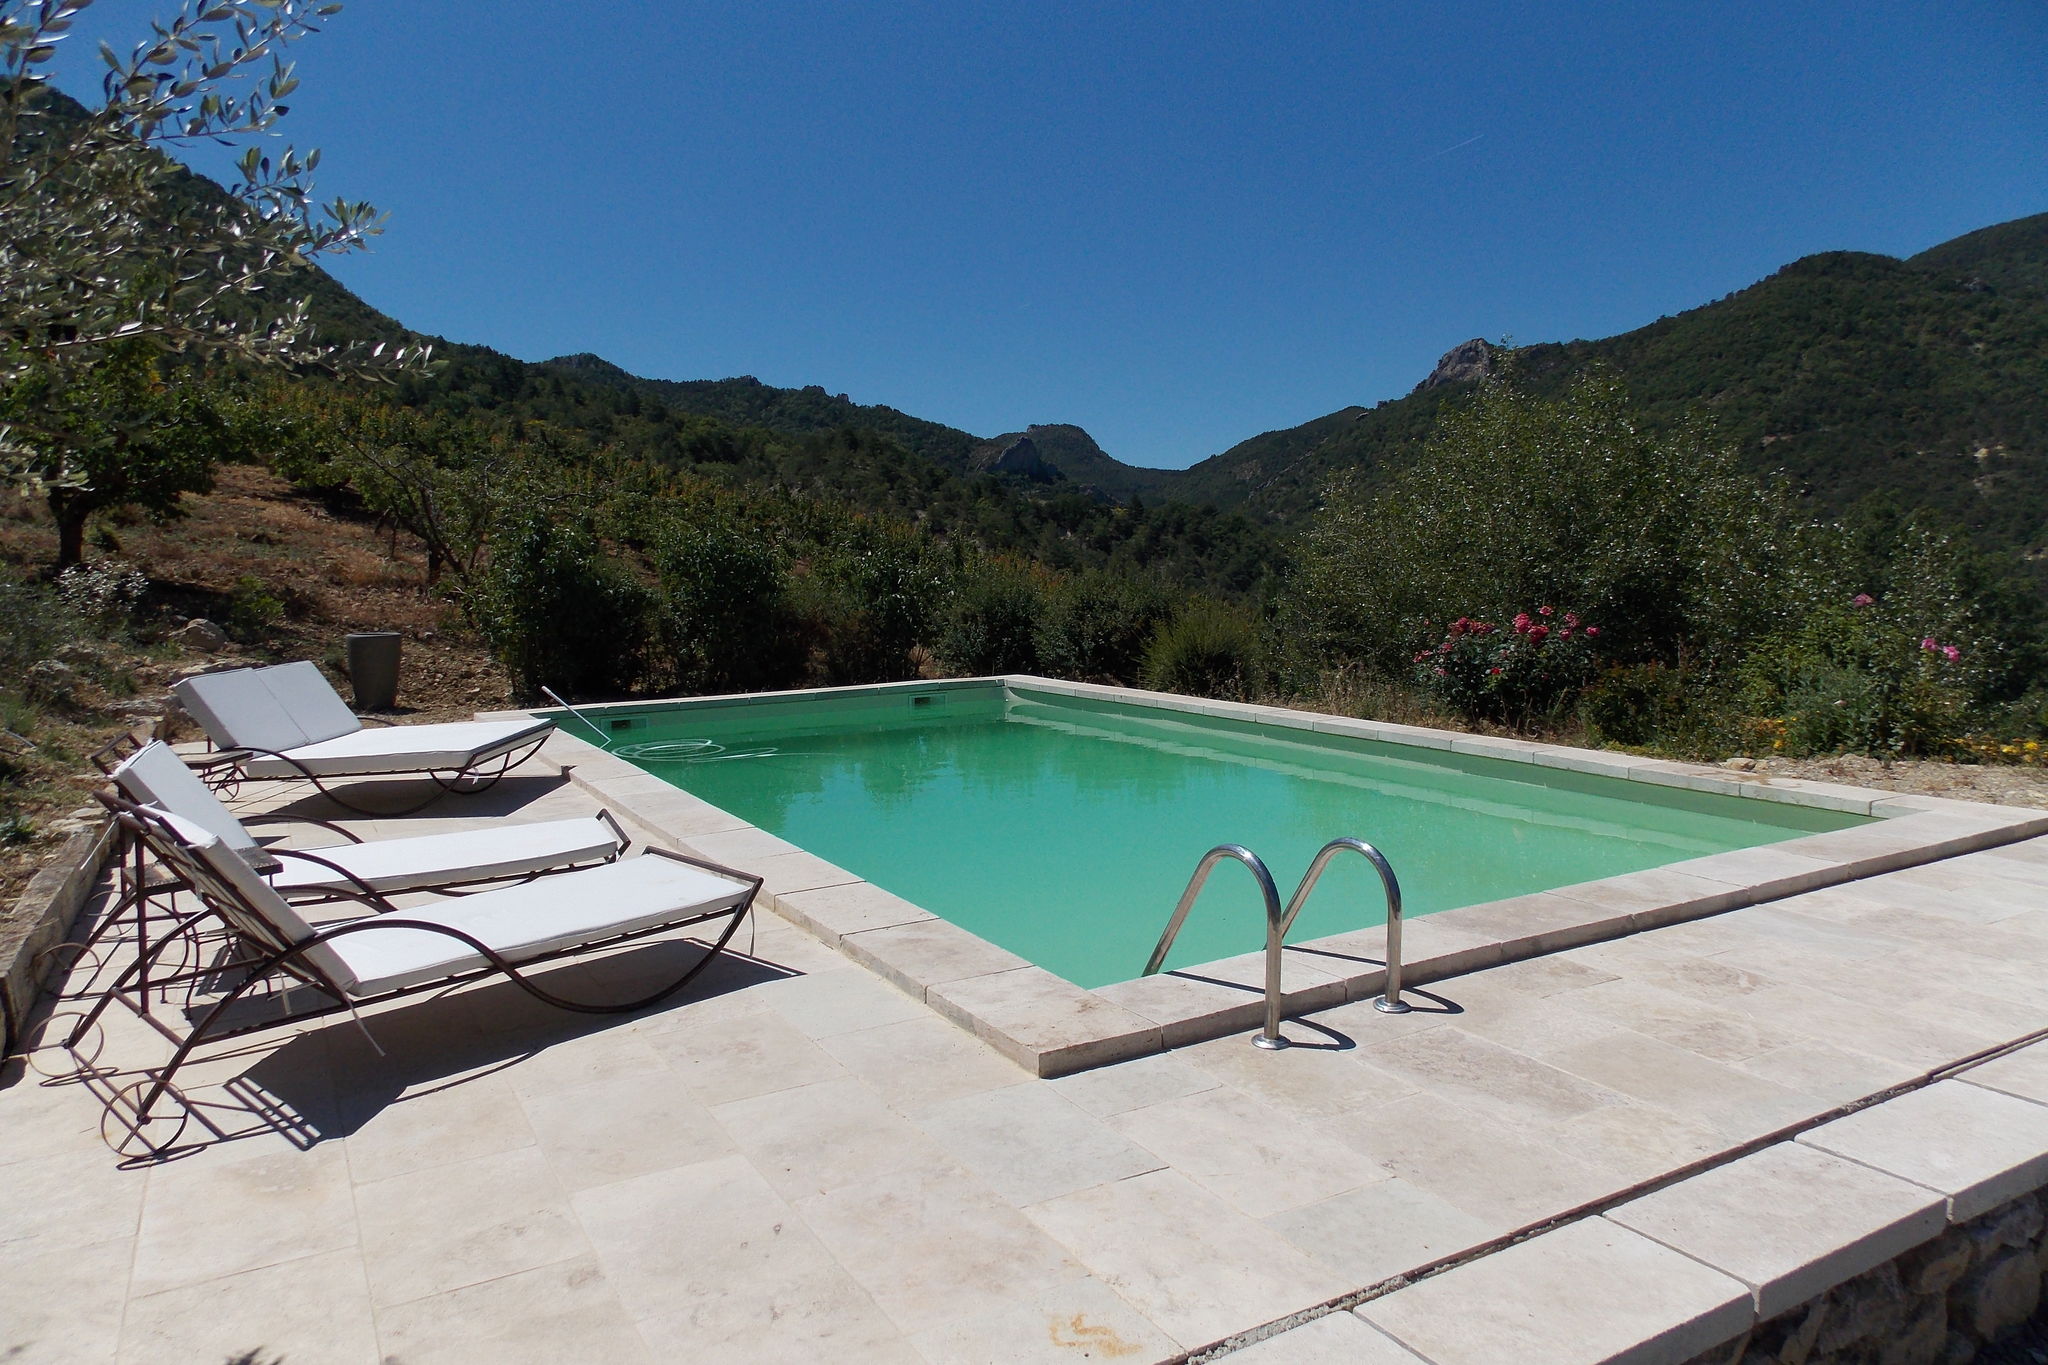 Holiday Home. Valley View. Private Pool. Boules Court. Roofed Terrace